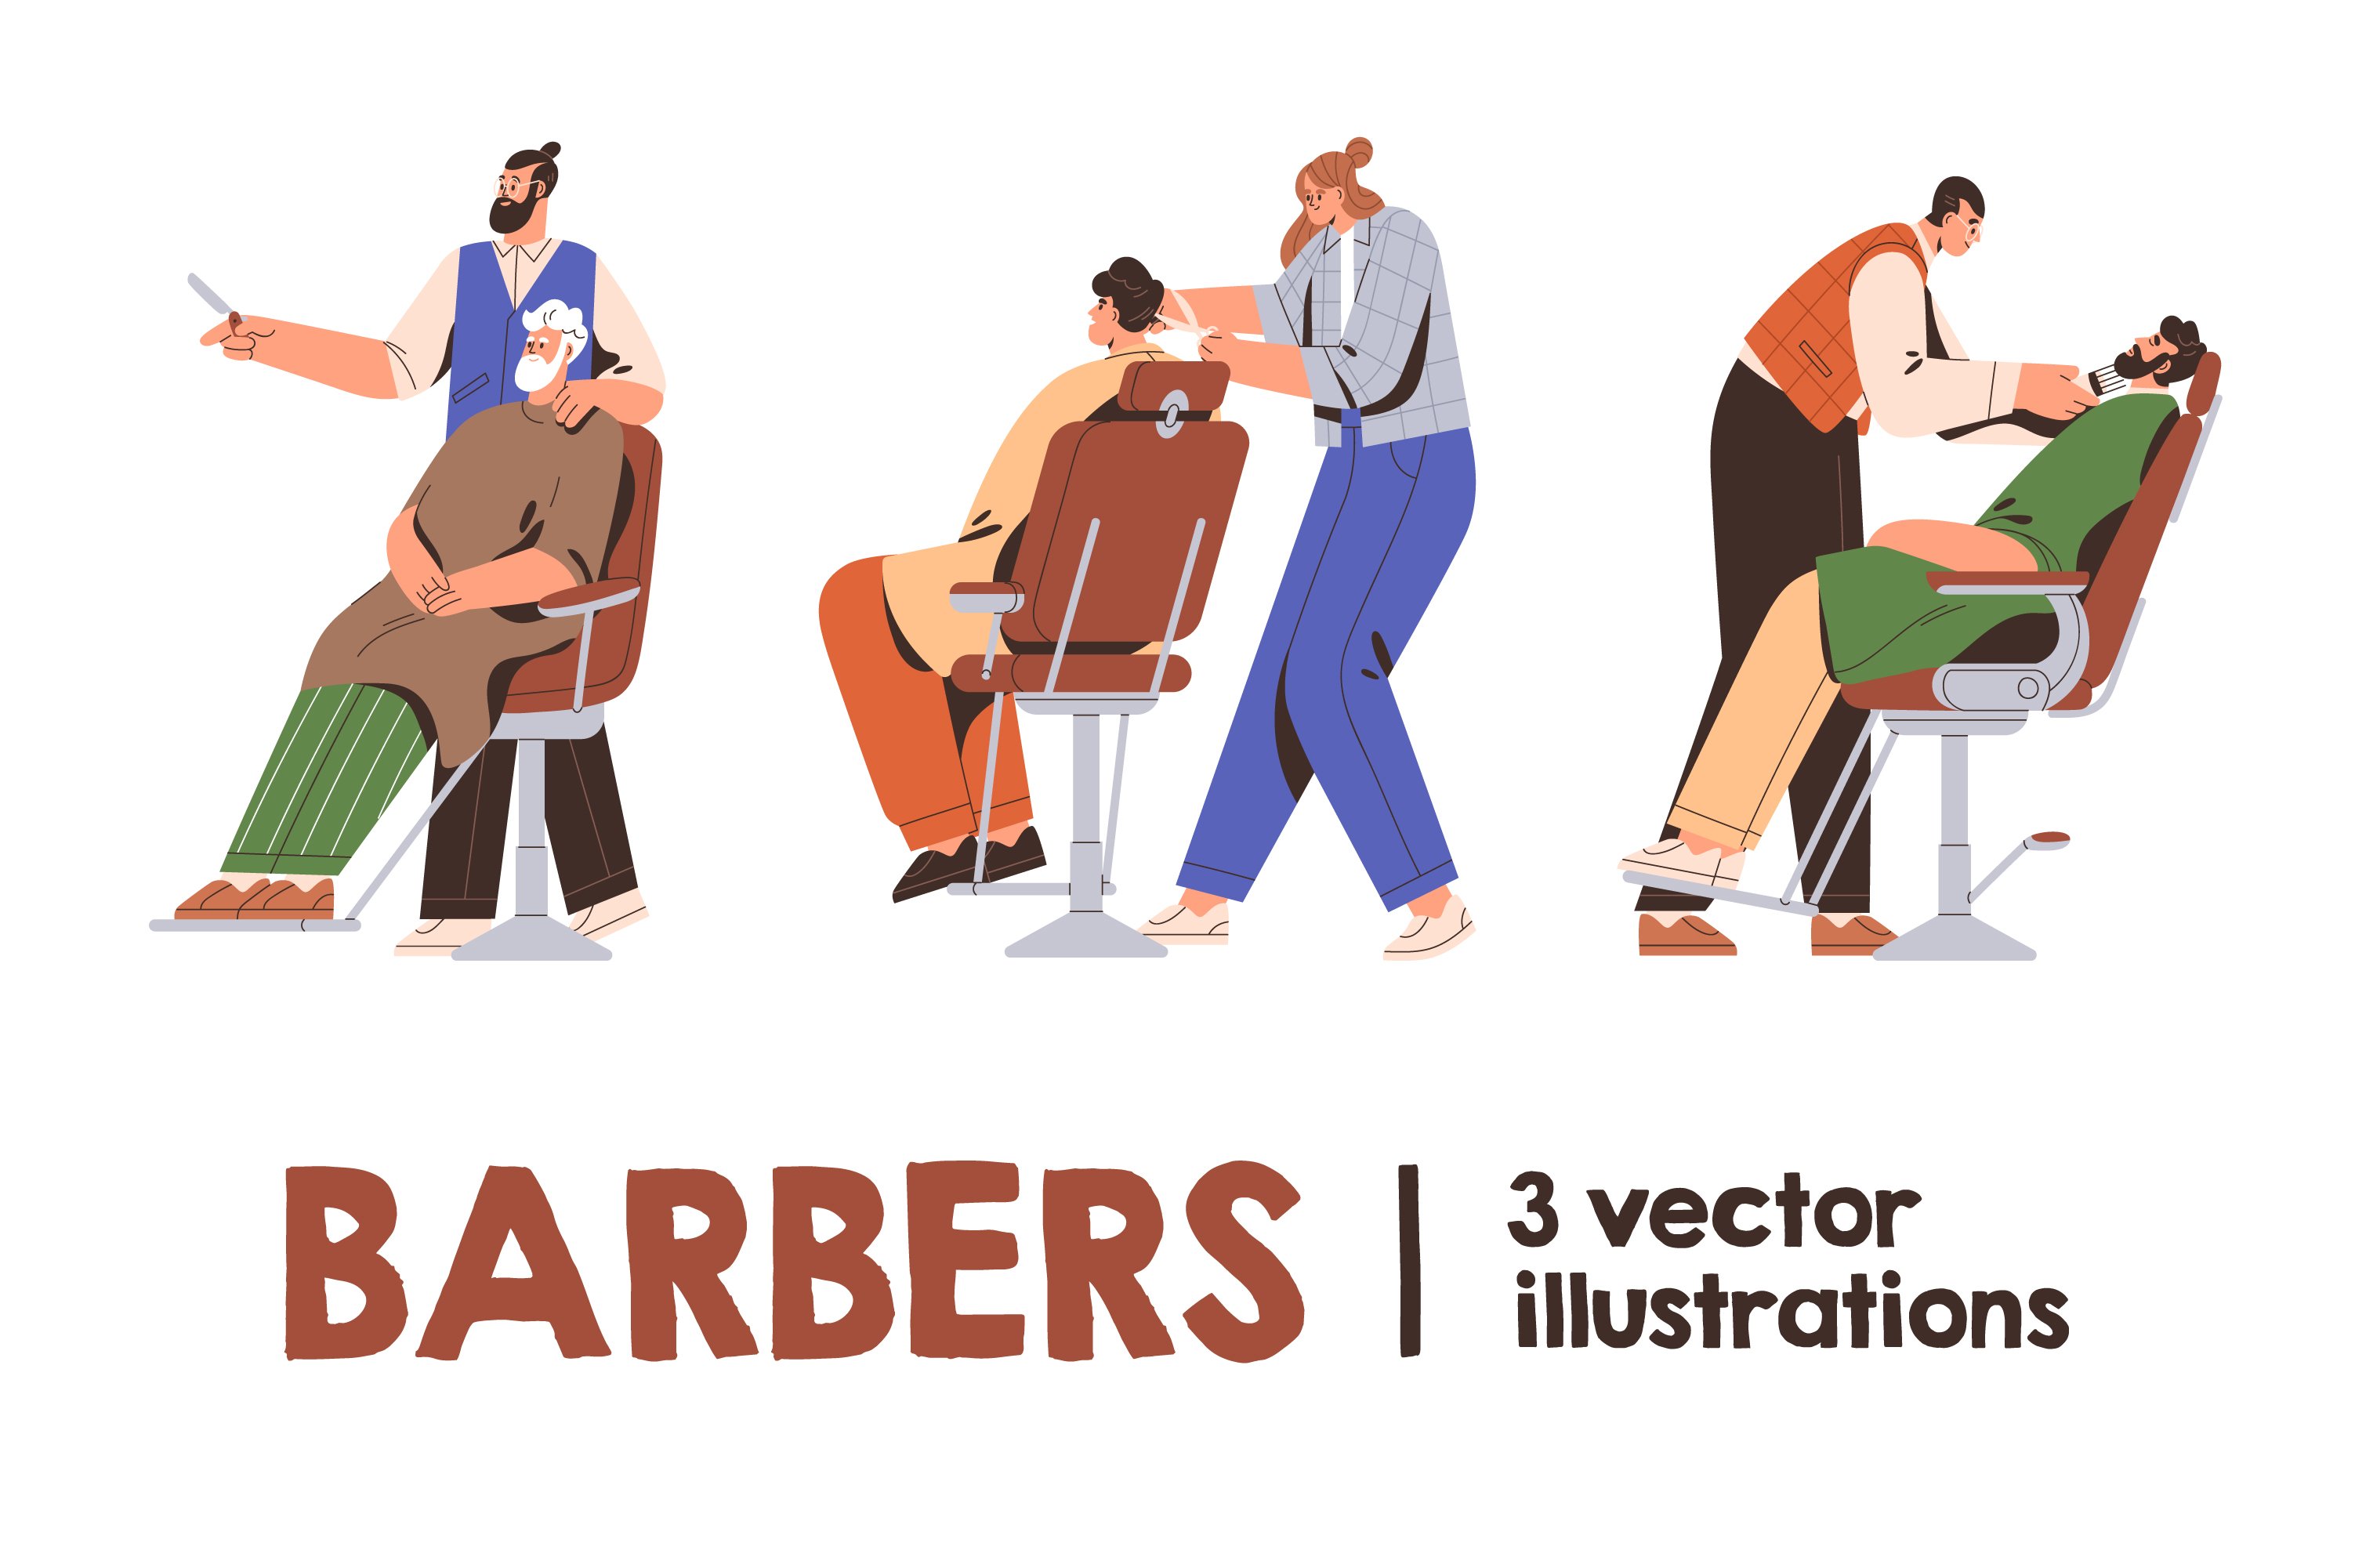 Barbers give haircut to clients set cover image.